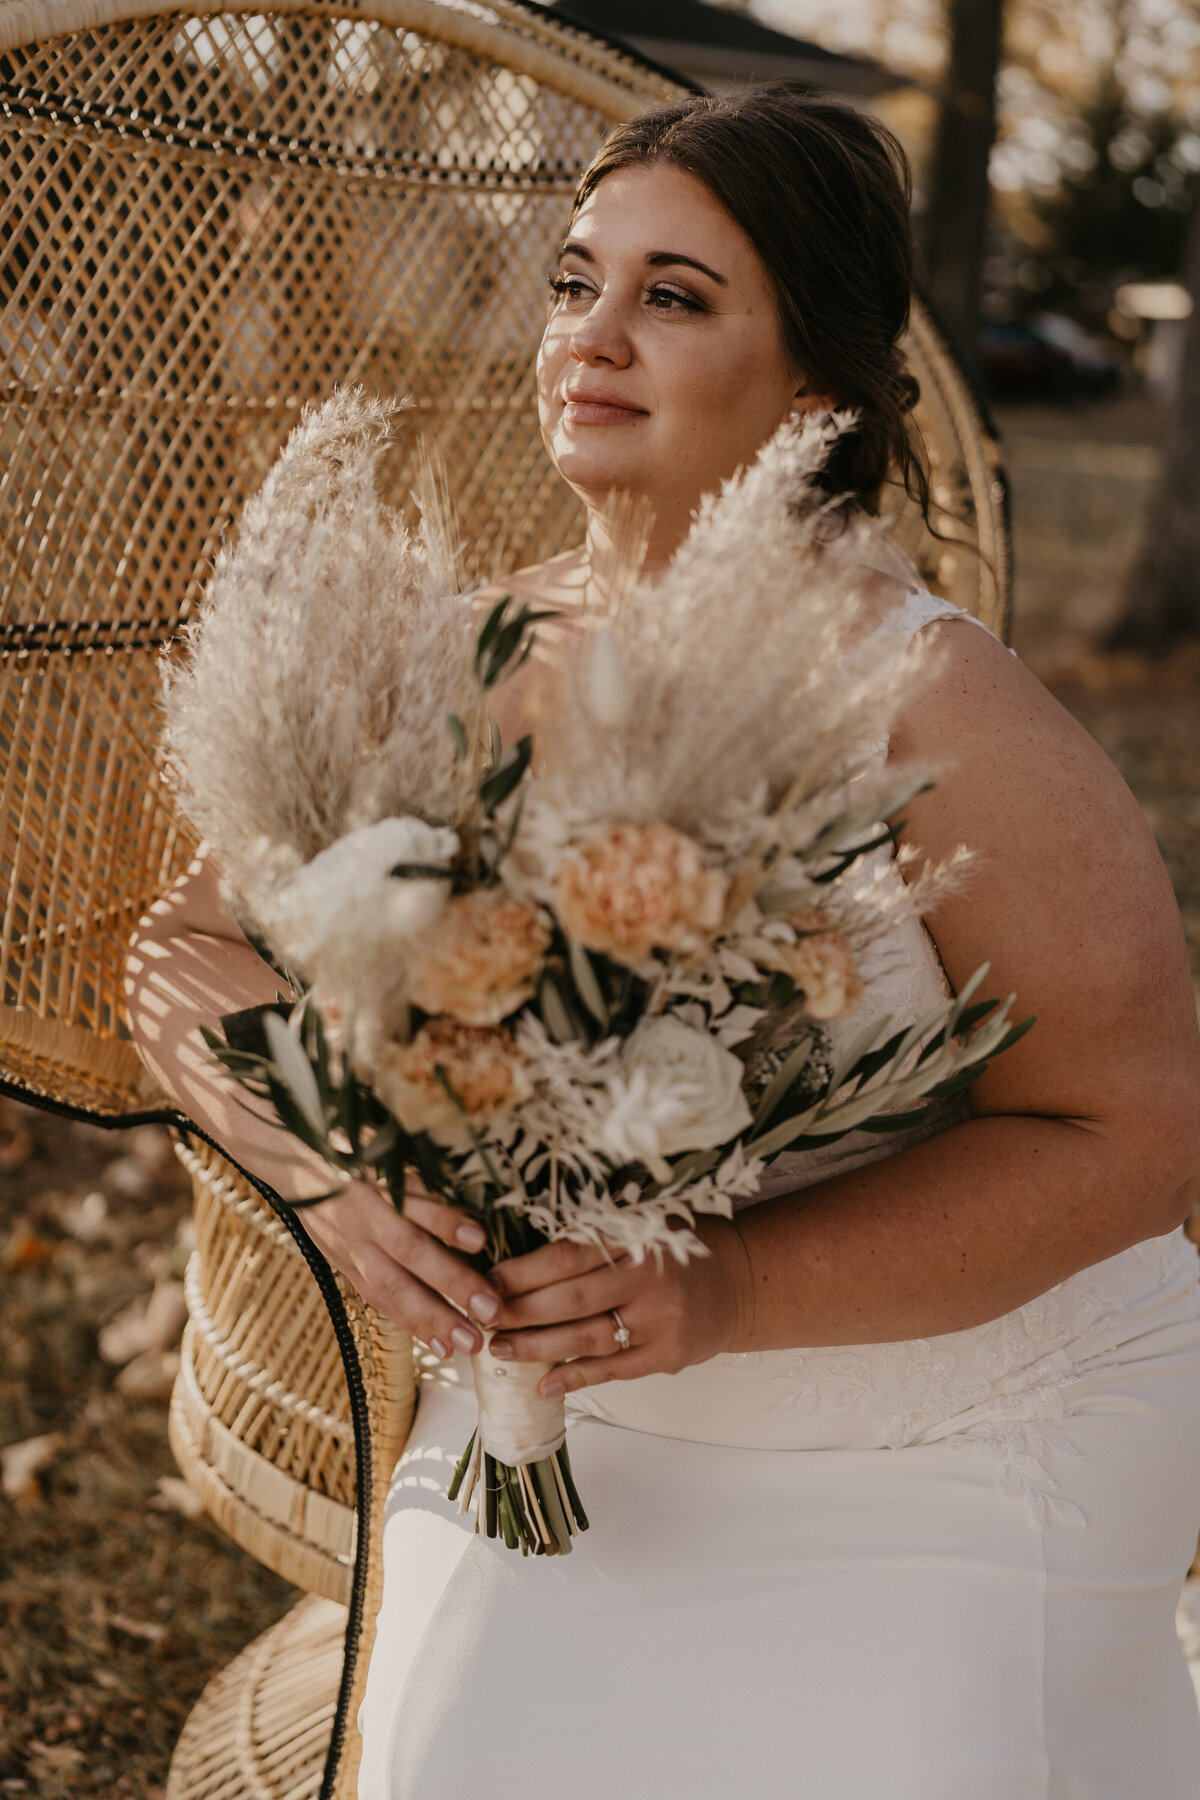 Bride's portrait with floral bouquet sitting on a vintage wicker chair.